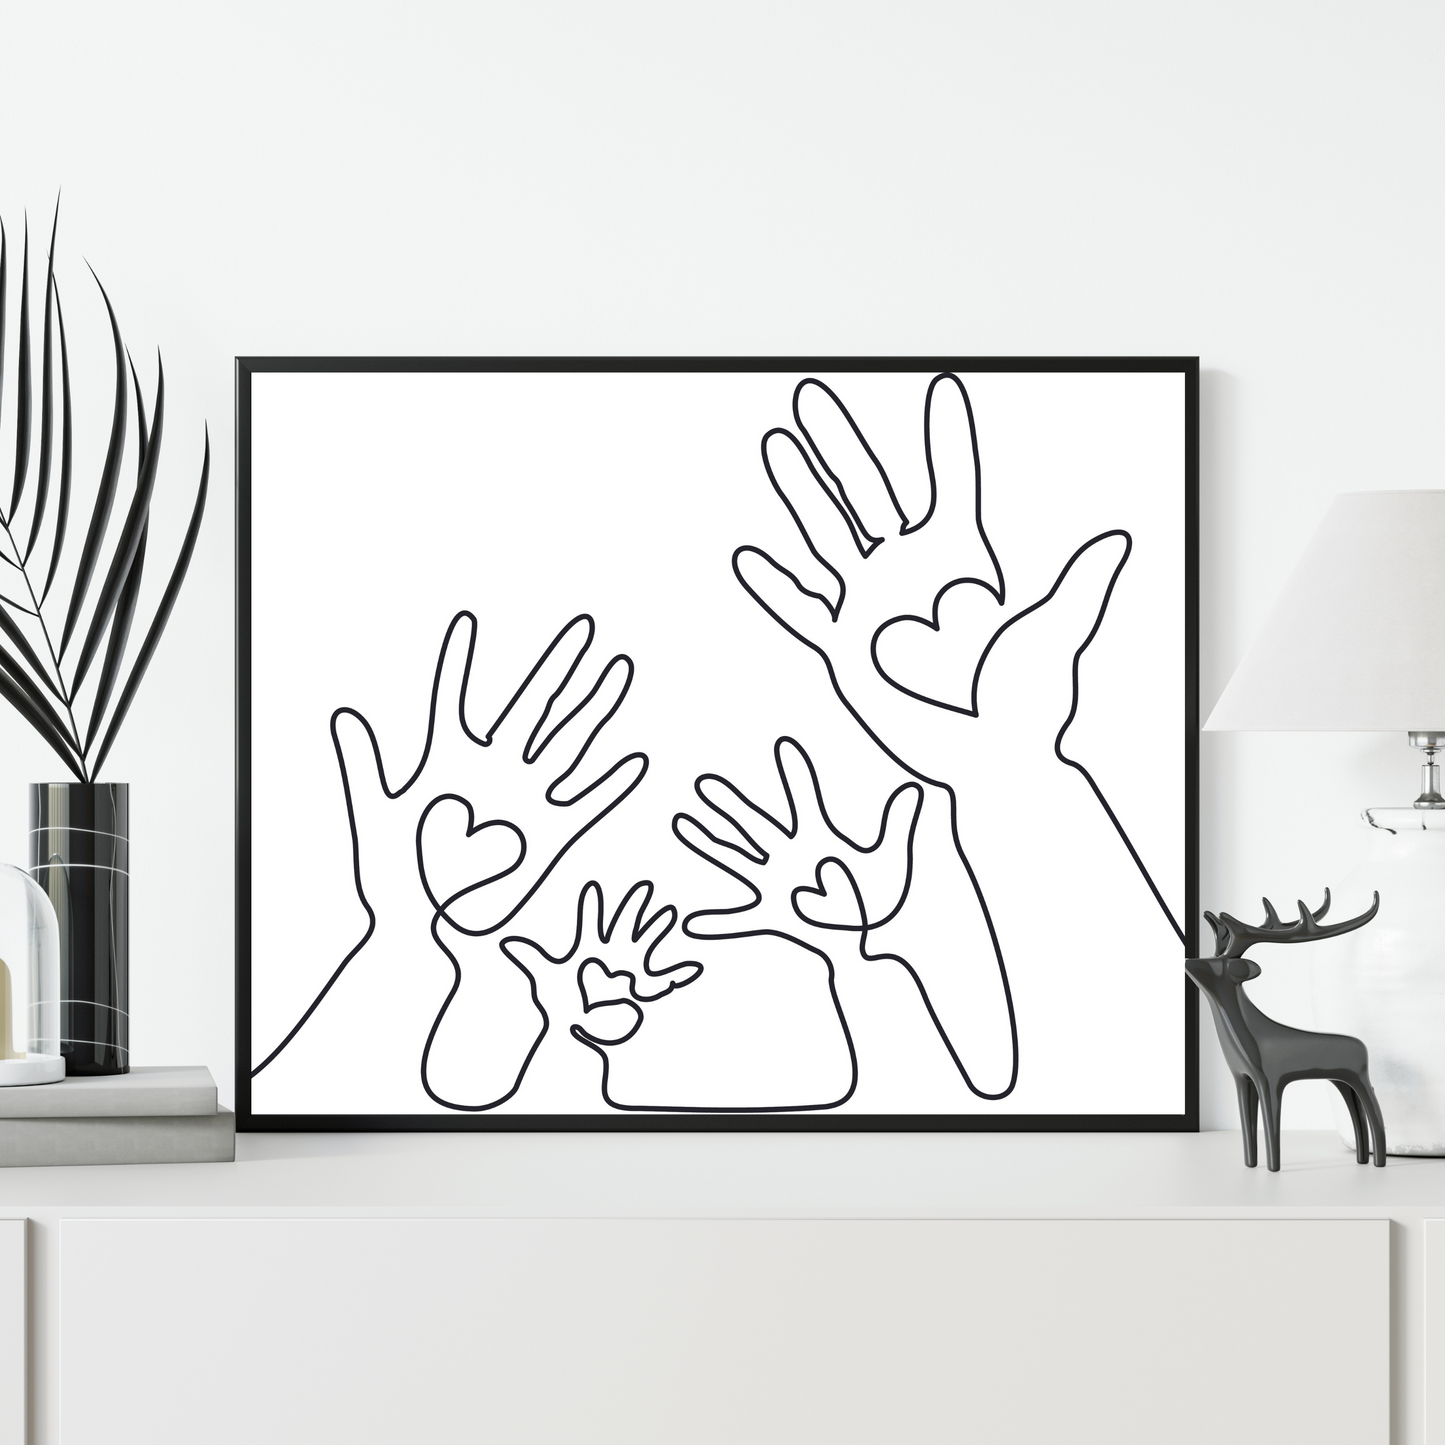 Abstract family hands holding hearts